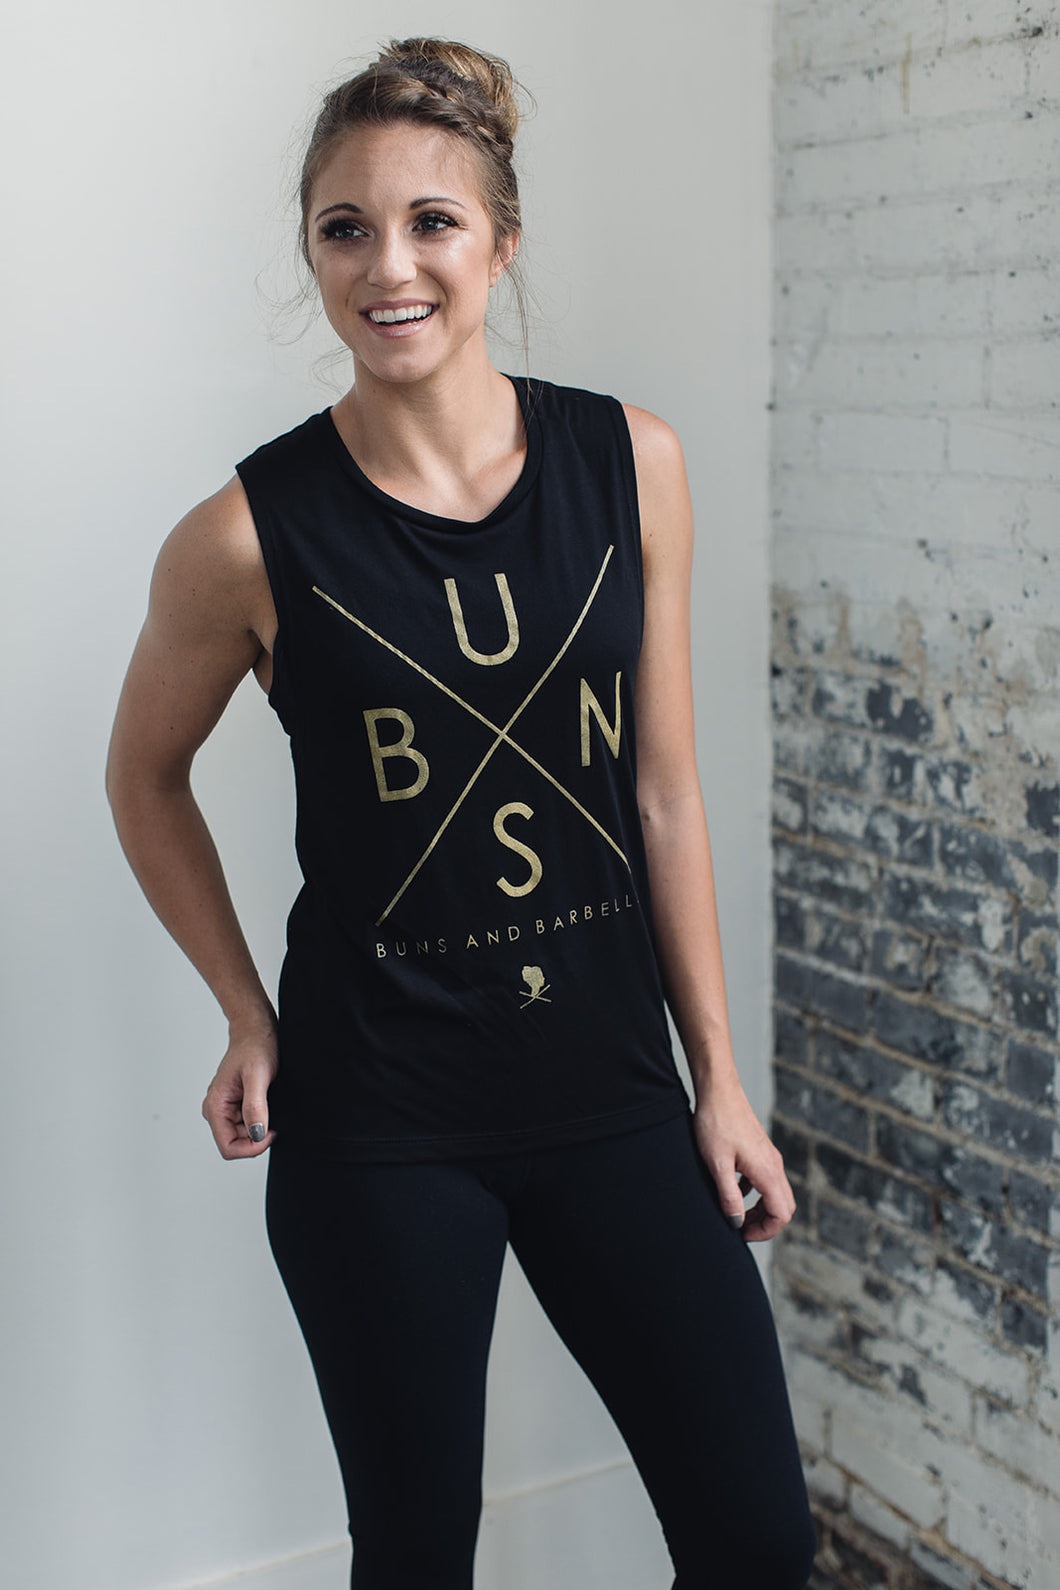 Athletic woman wearing a black muscle tank with a graphic on front